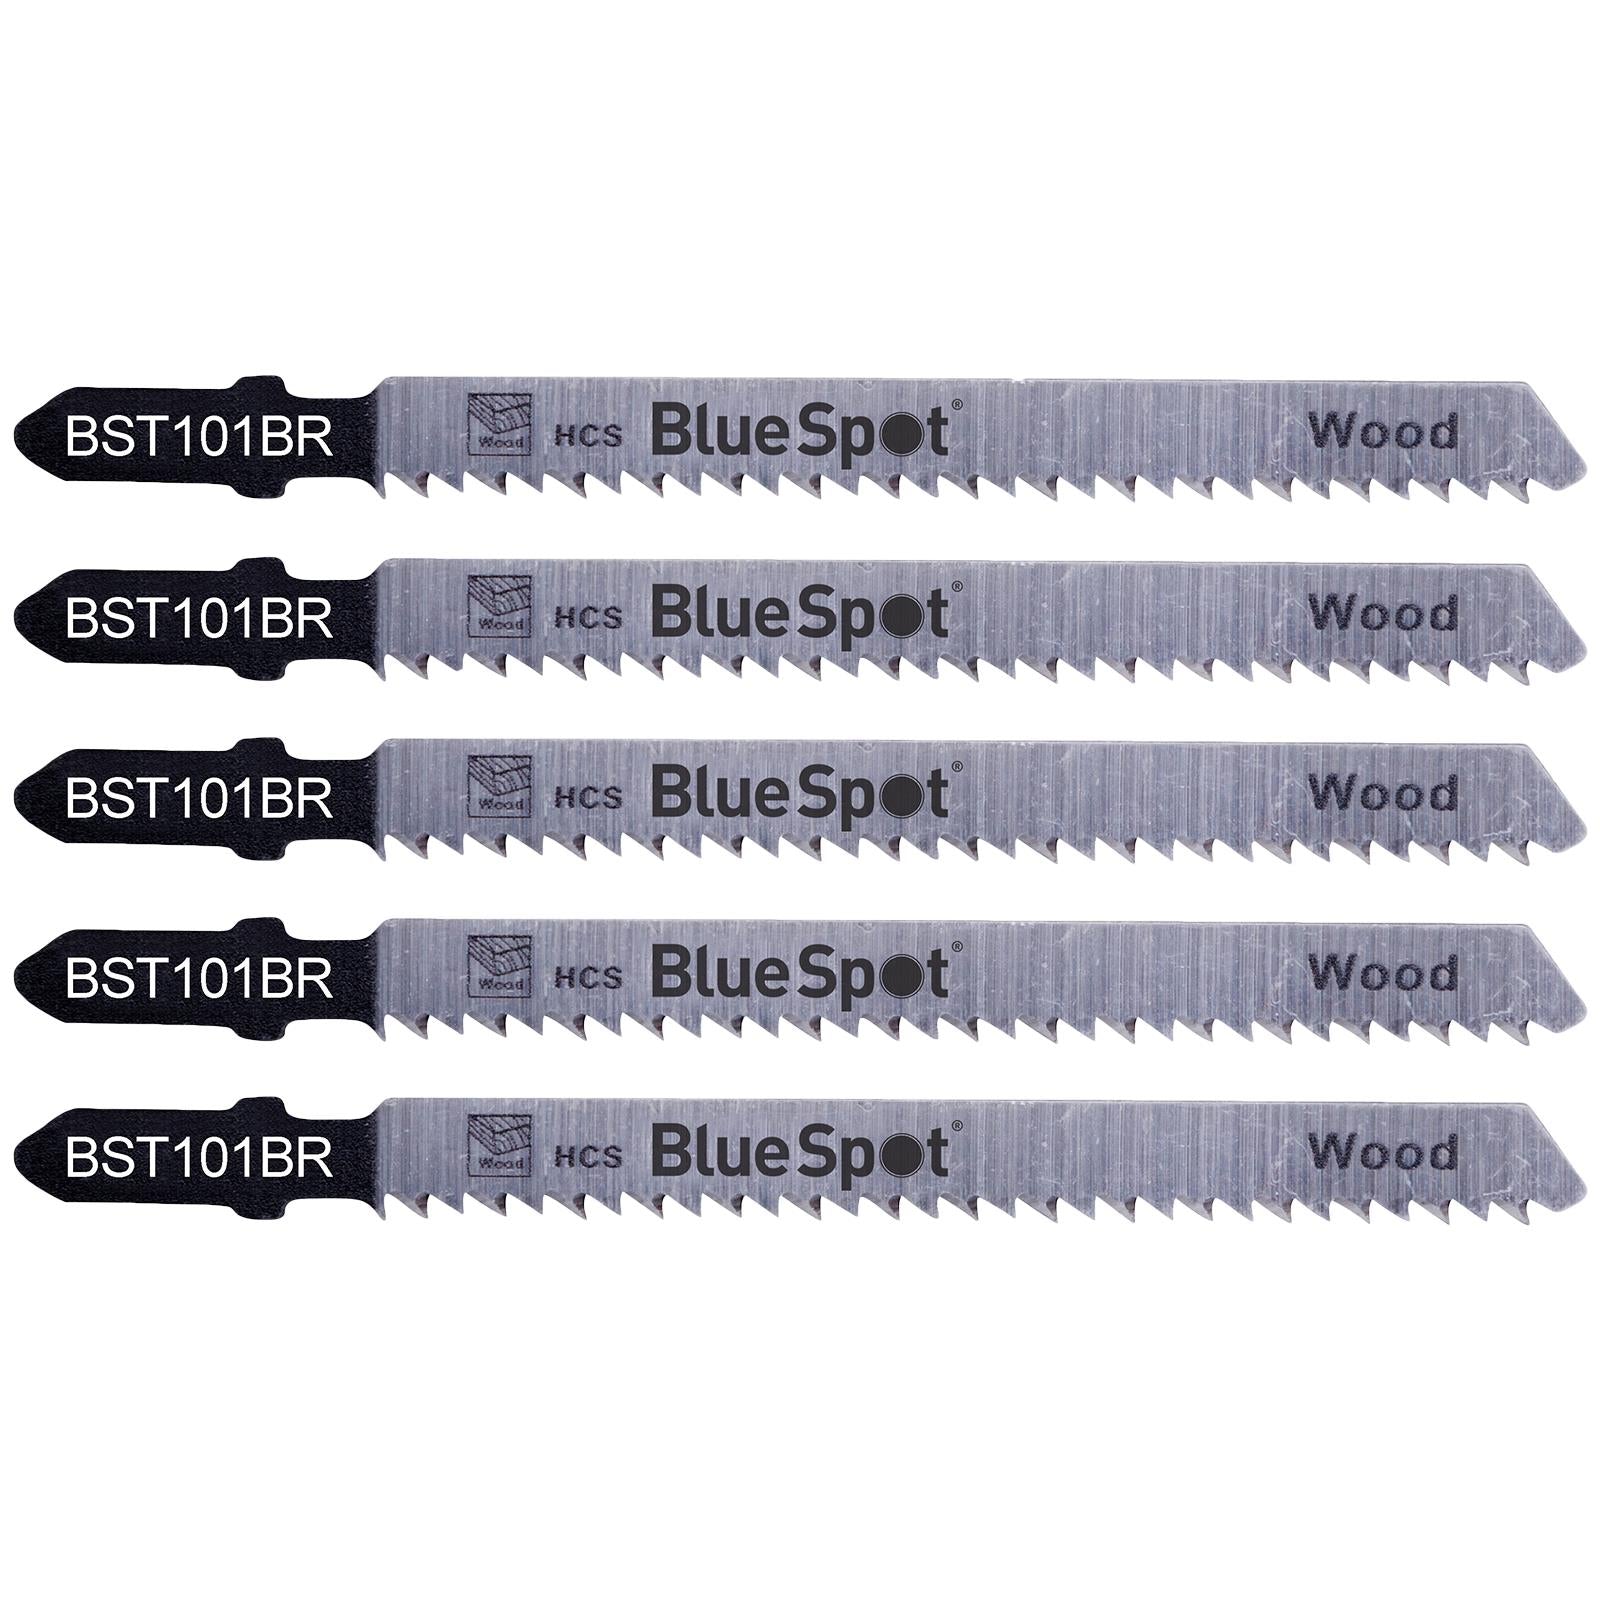 BlueSpot Jigsaw Blades 5 Piece Reverse Pitch for Wood 10 TPI T101BR